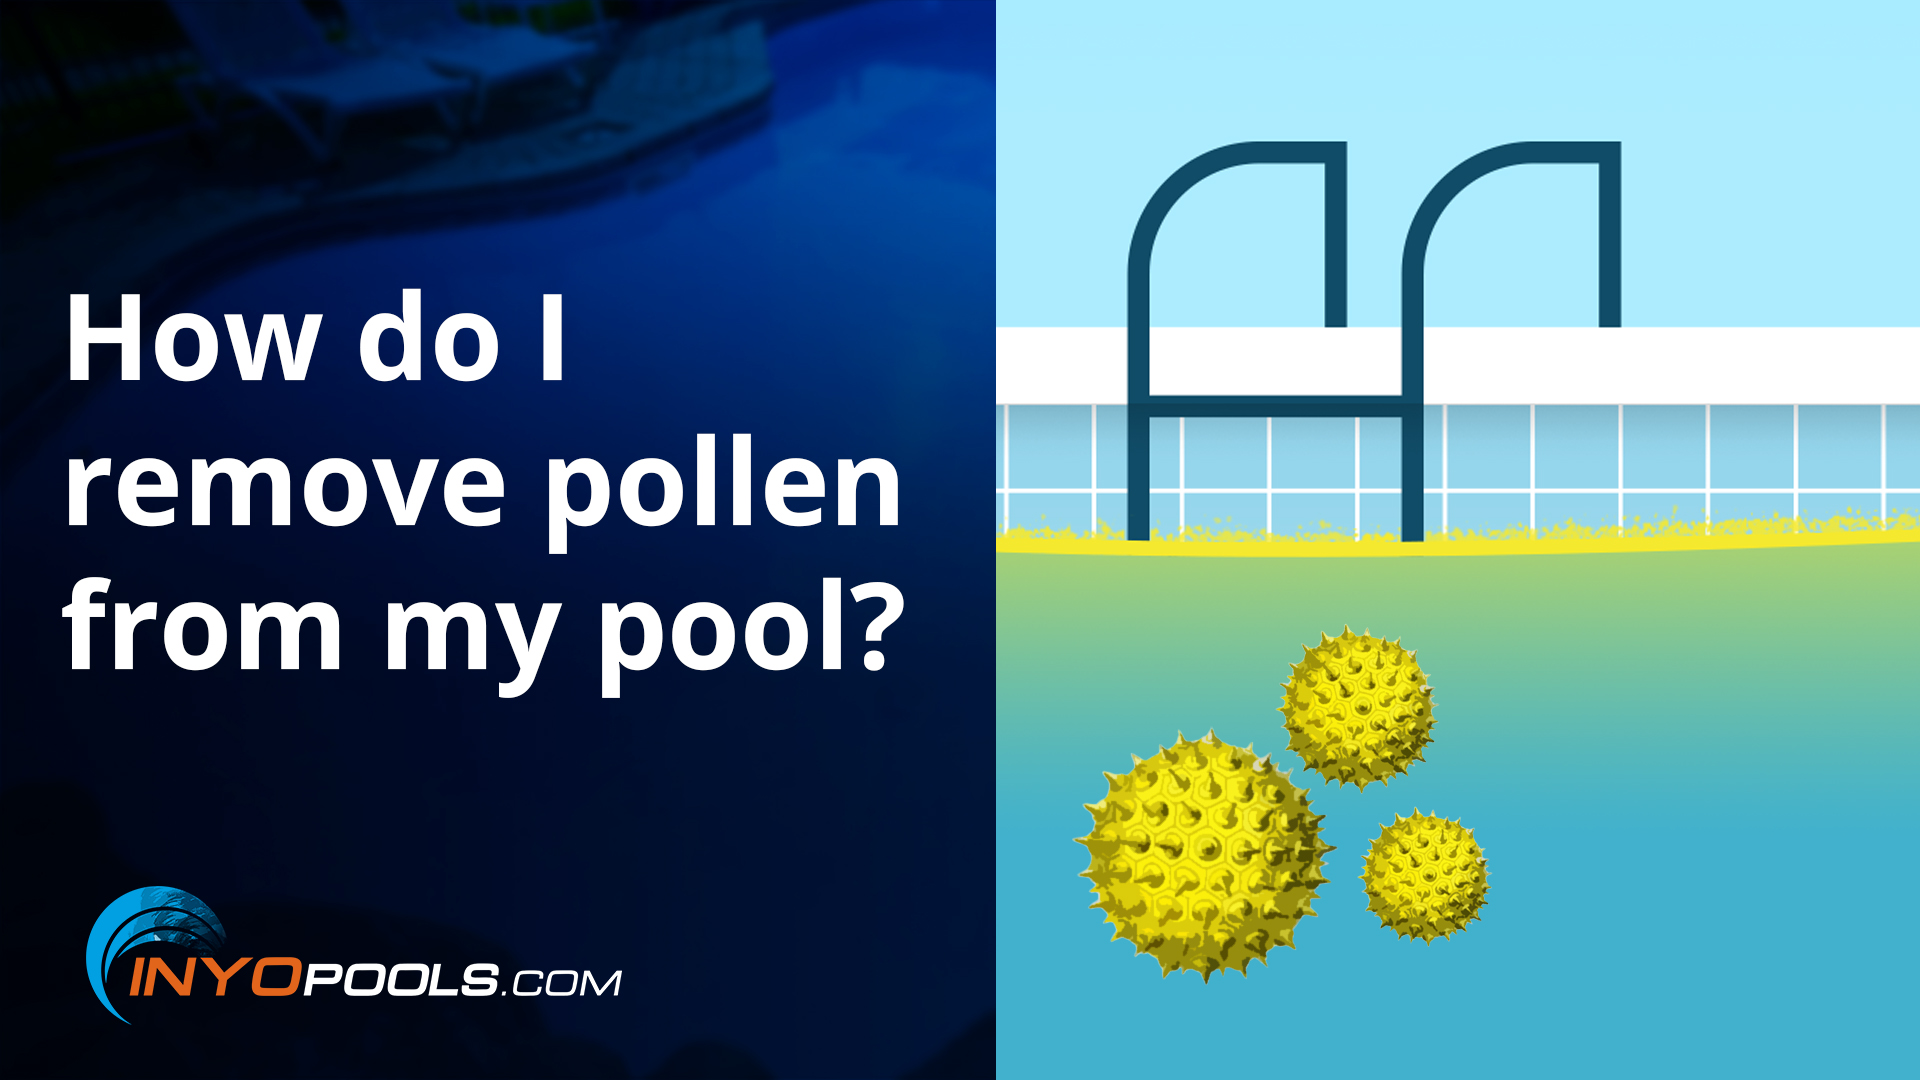 How do I remove pollen from my pool?